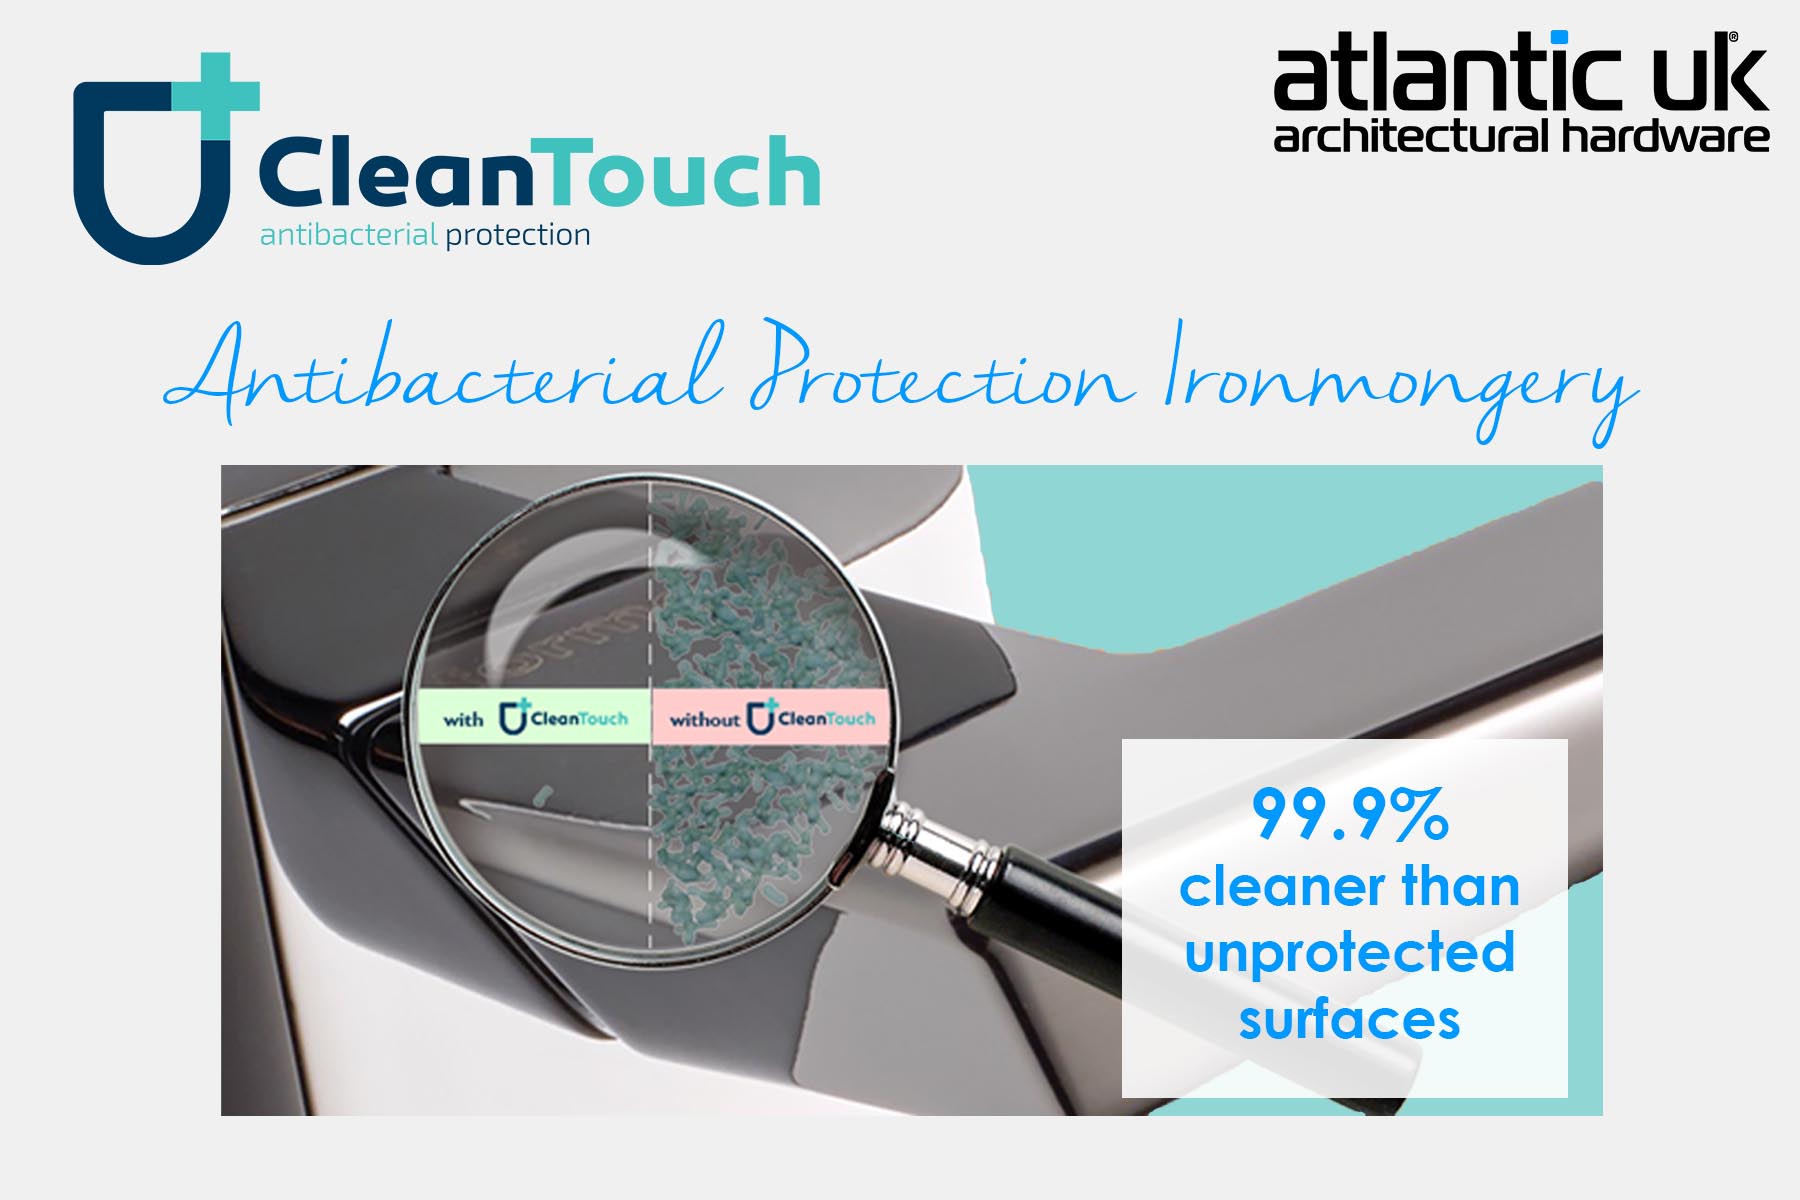 Have you seen our CleanTouch range of anti-bacterial protection ironmongery?

From Commercial return to door levers to Stylish Forme designs in trending finishes... CleanTouch offers fashionable protection!

The special layer of protection on our Cleantouch ironmongery slowly releases silver ions, which penetrates the bacteria membrane, compromising the reproduction and eventually killing the germs and protecting the door handle against microbes.

Get in touch to find out more! image